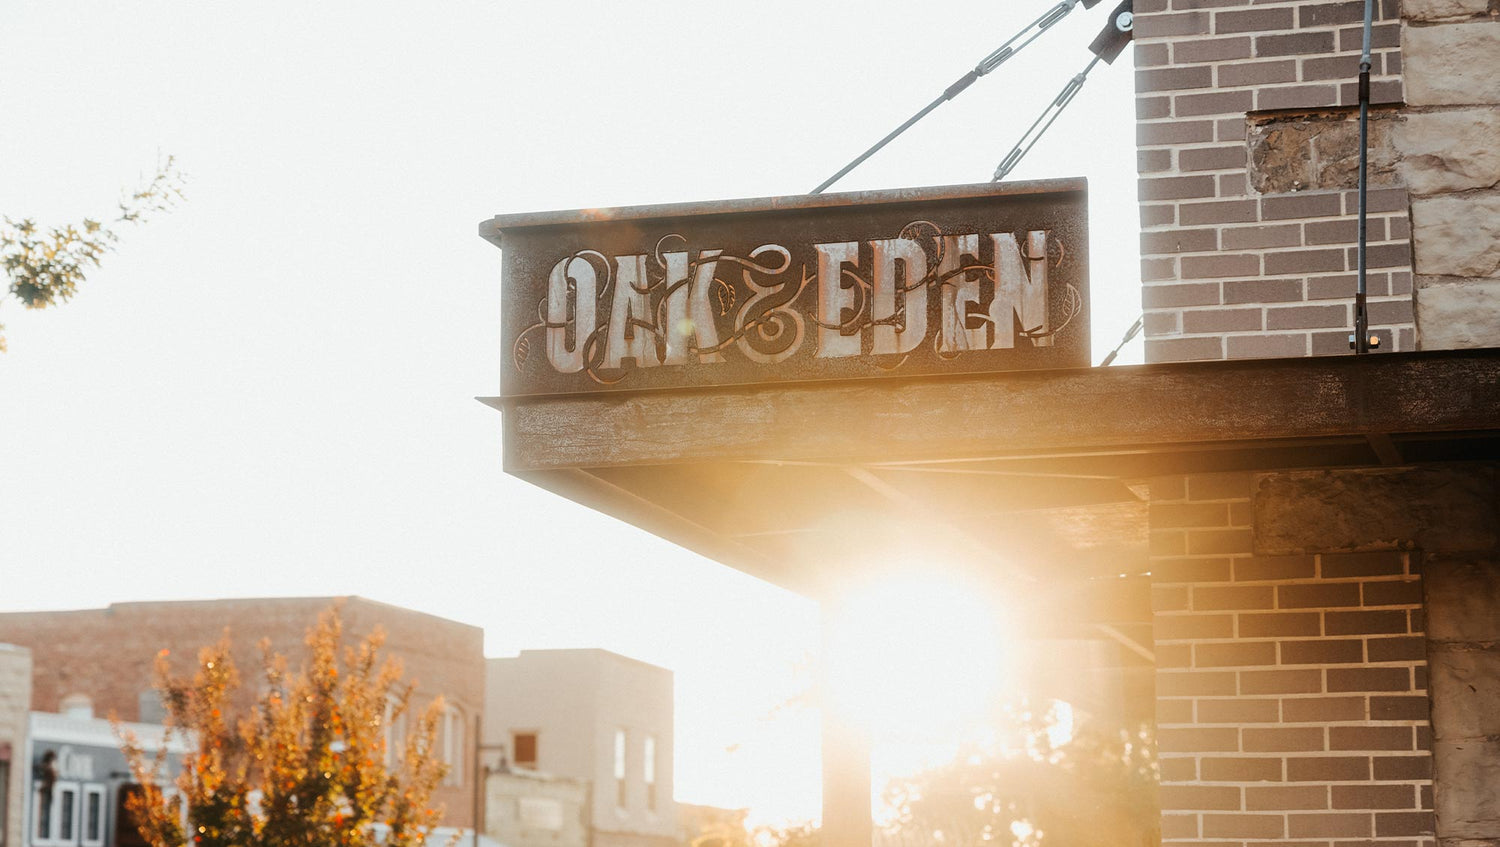 Oak & Eden flagship sign in Downtown Bridgeport, Texas. The sun is shining on a brick building as it sets.